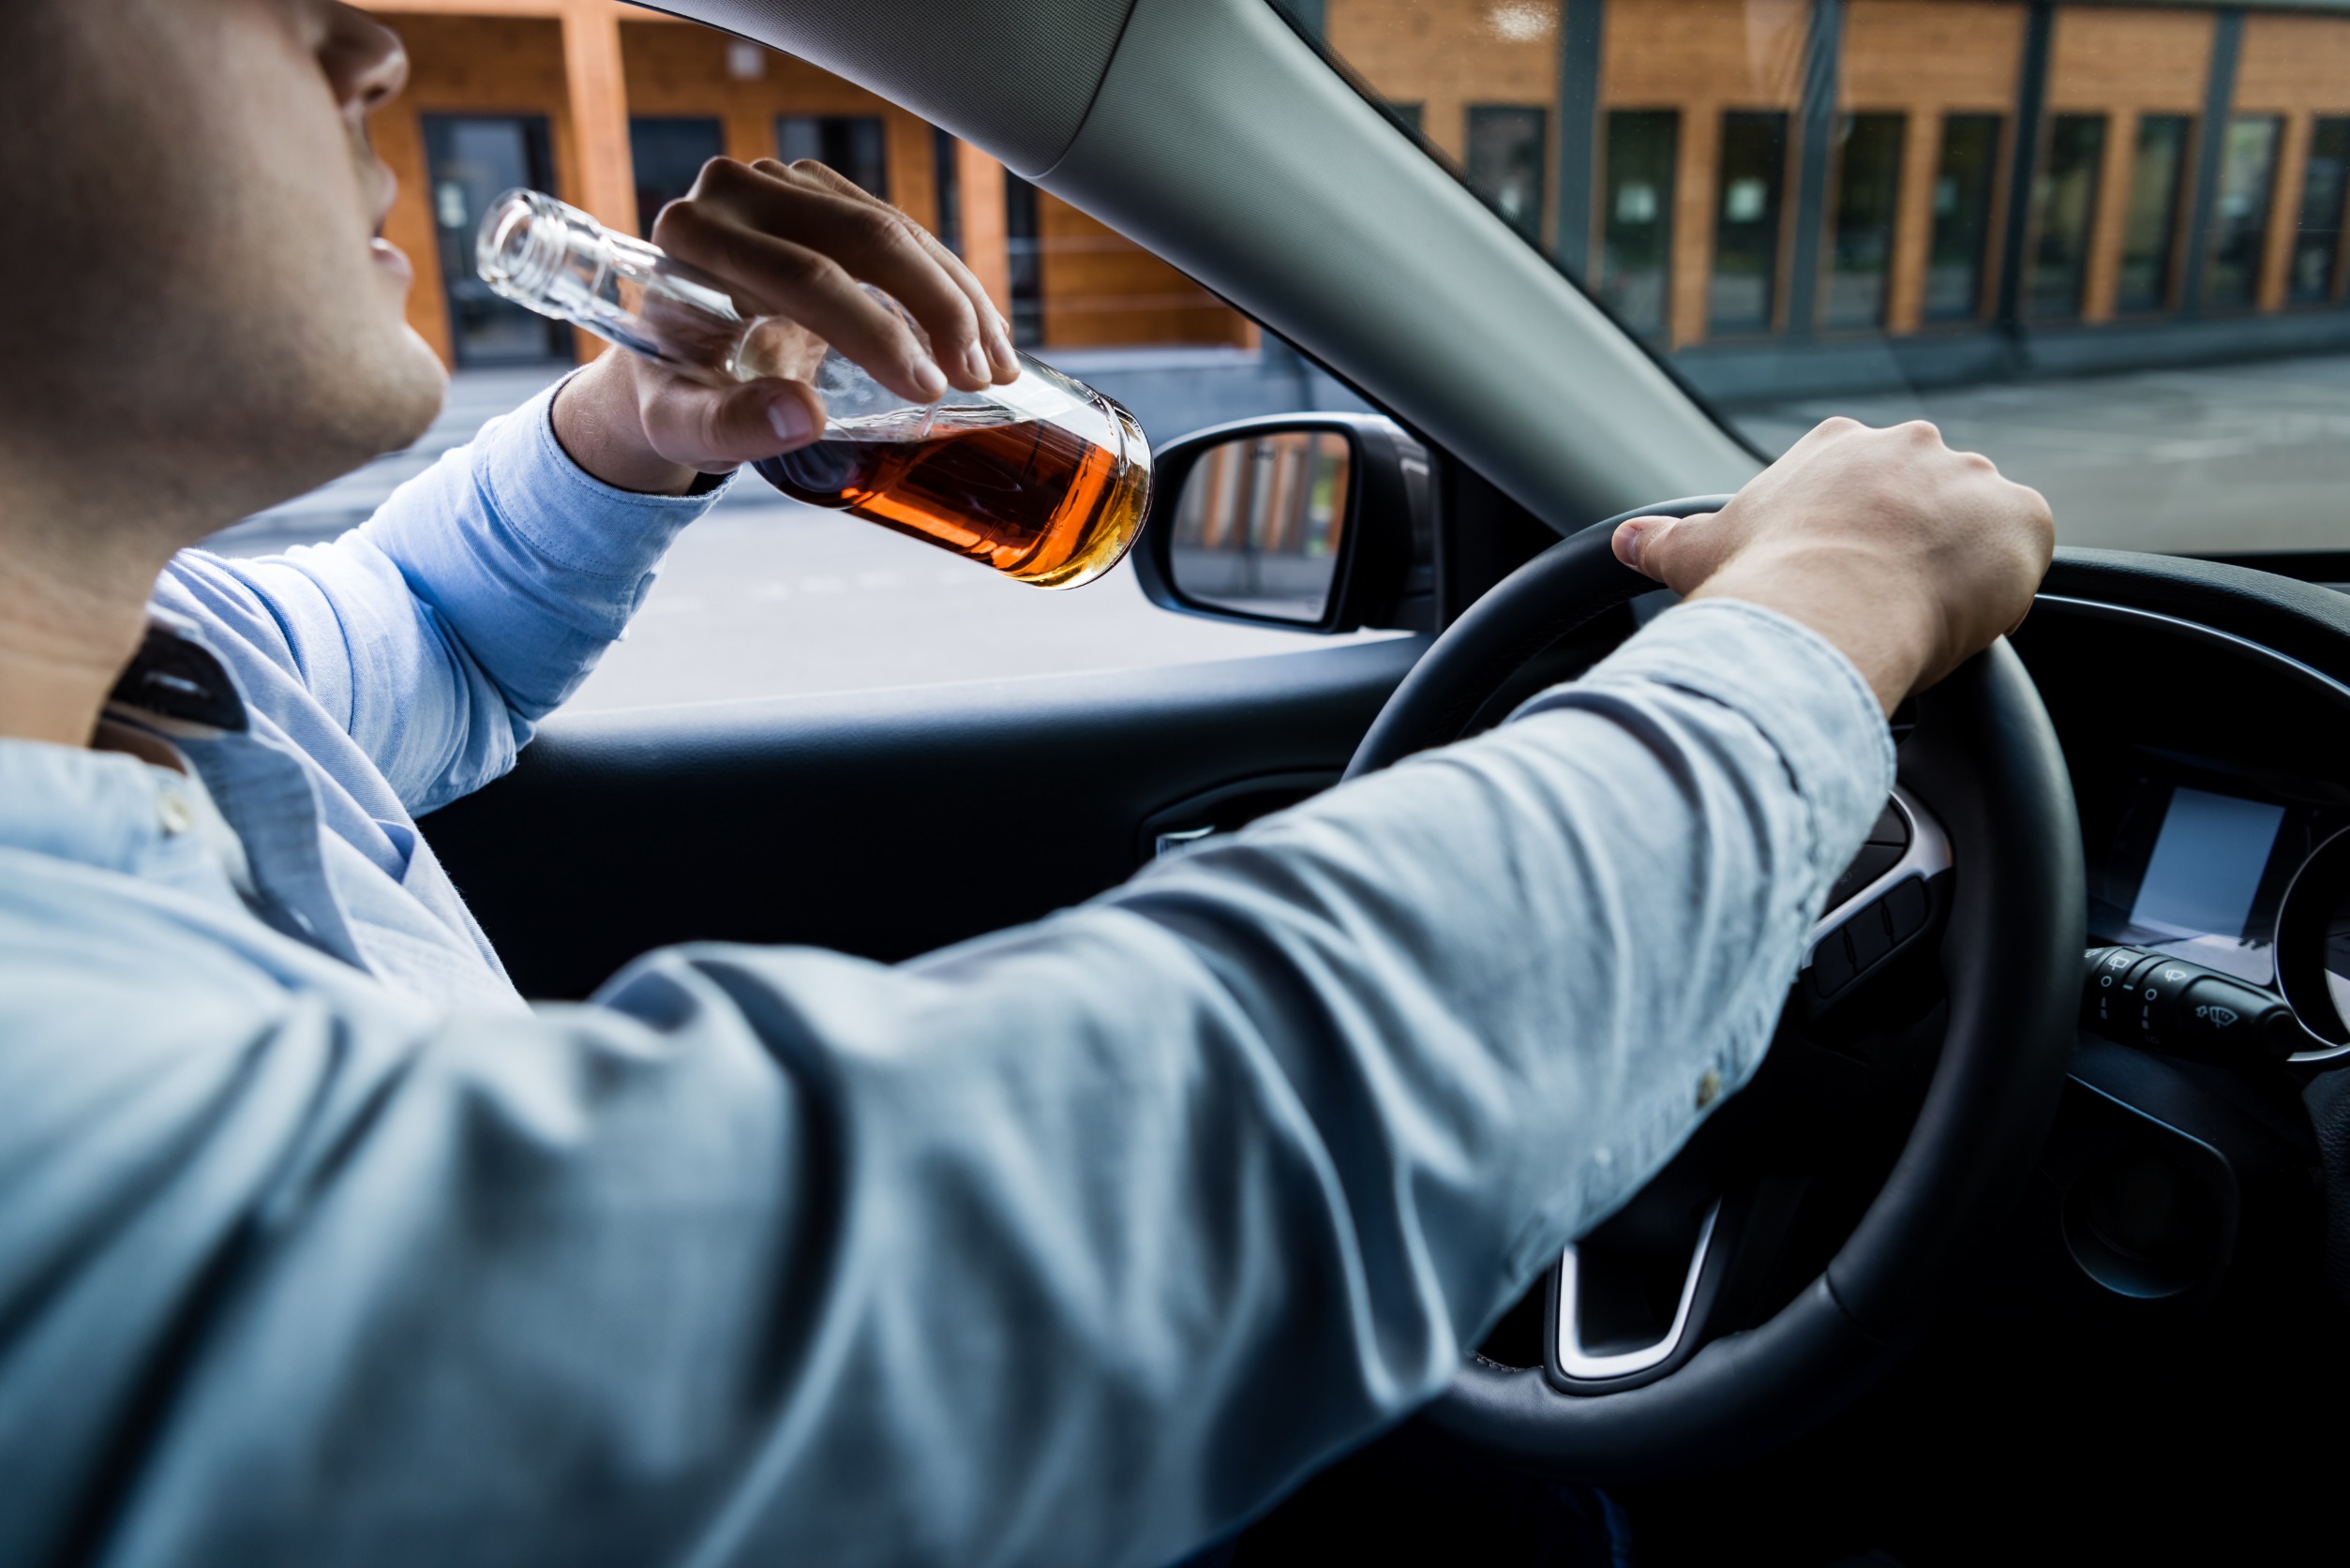 USDOT urged to being rule making on impaired driving prevention technology